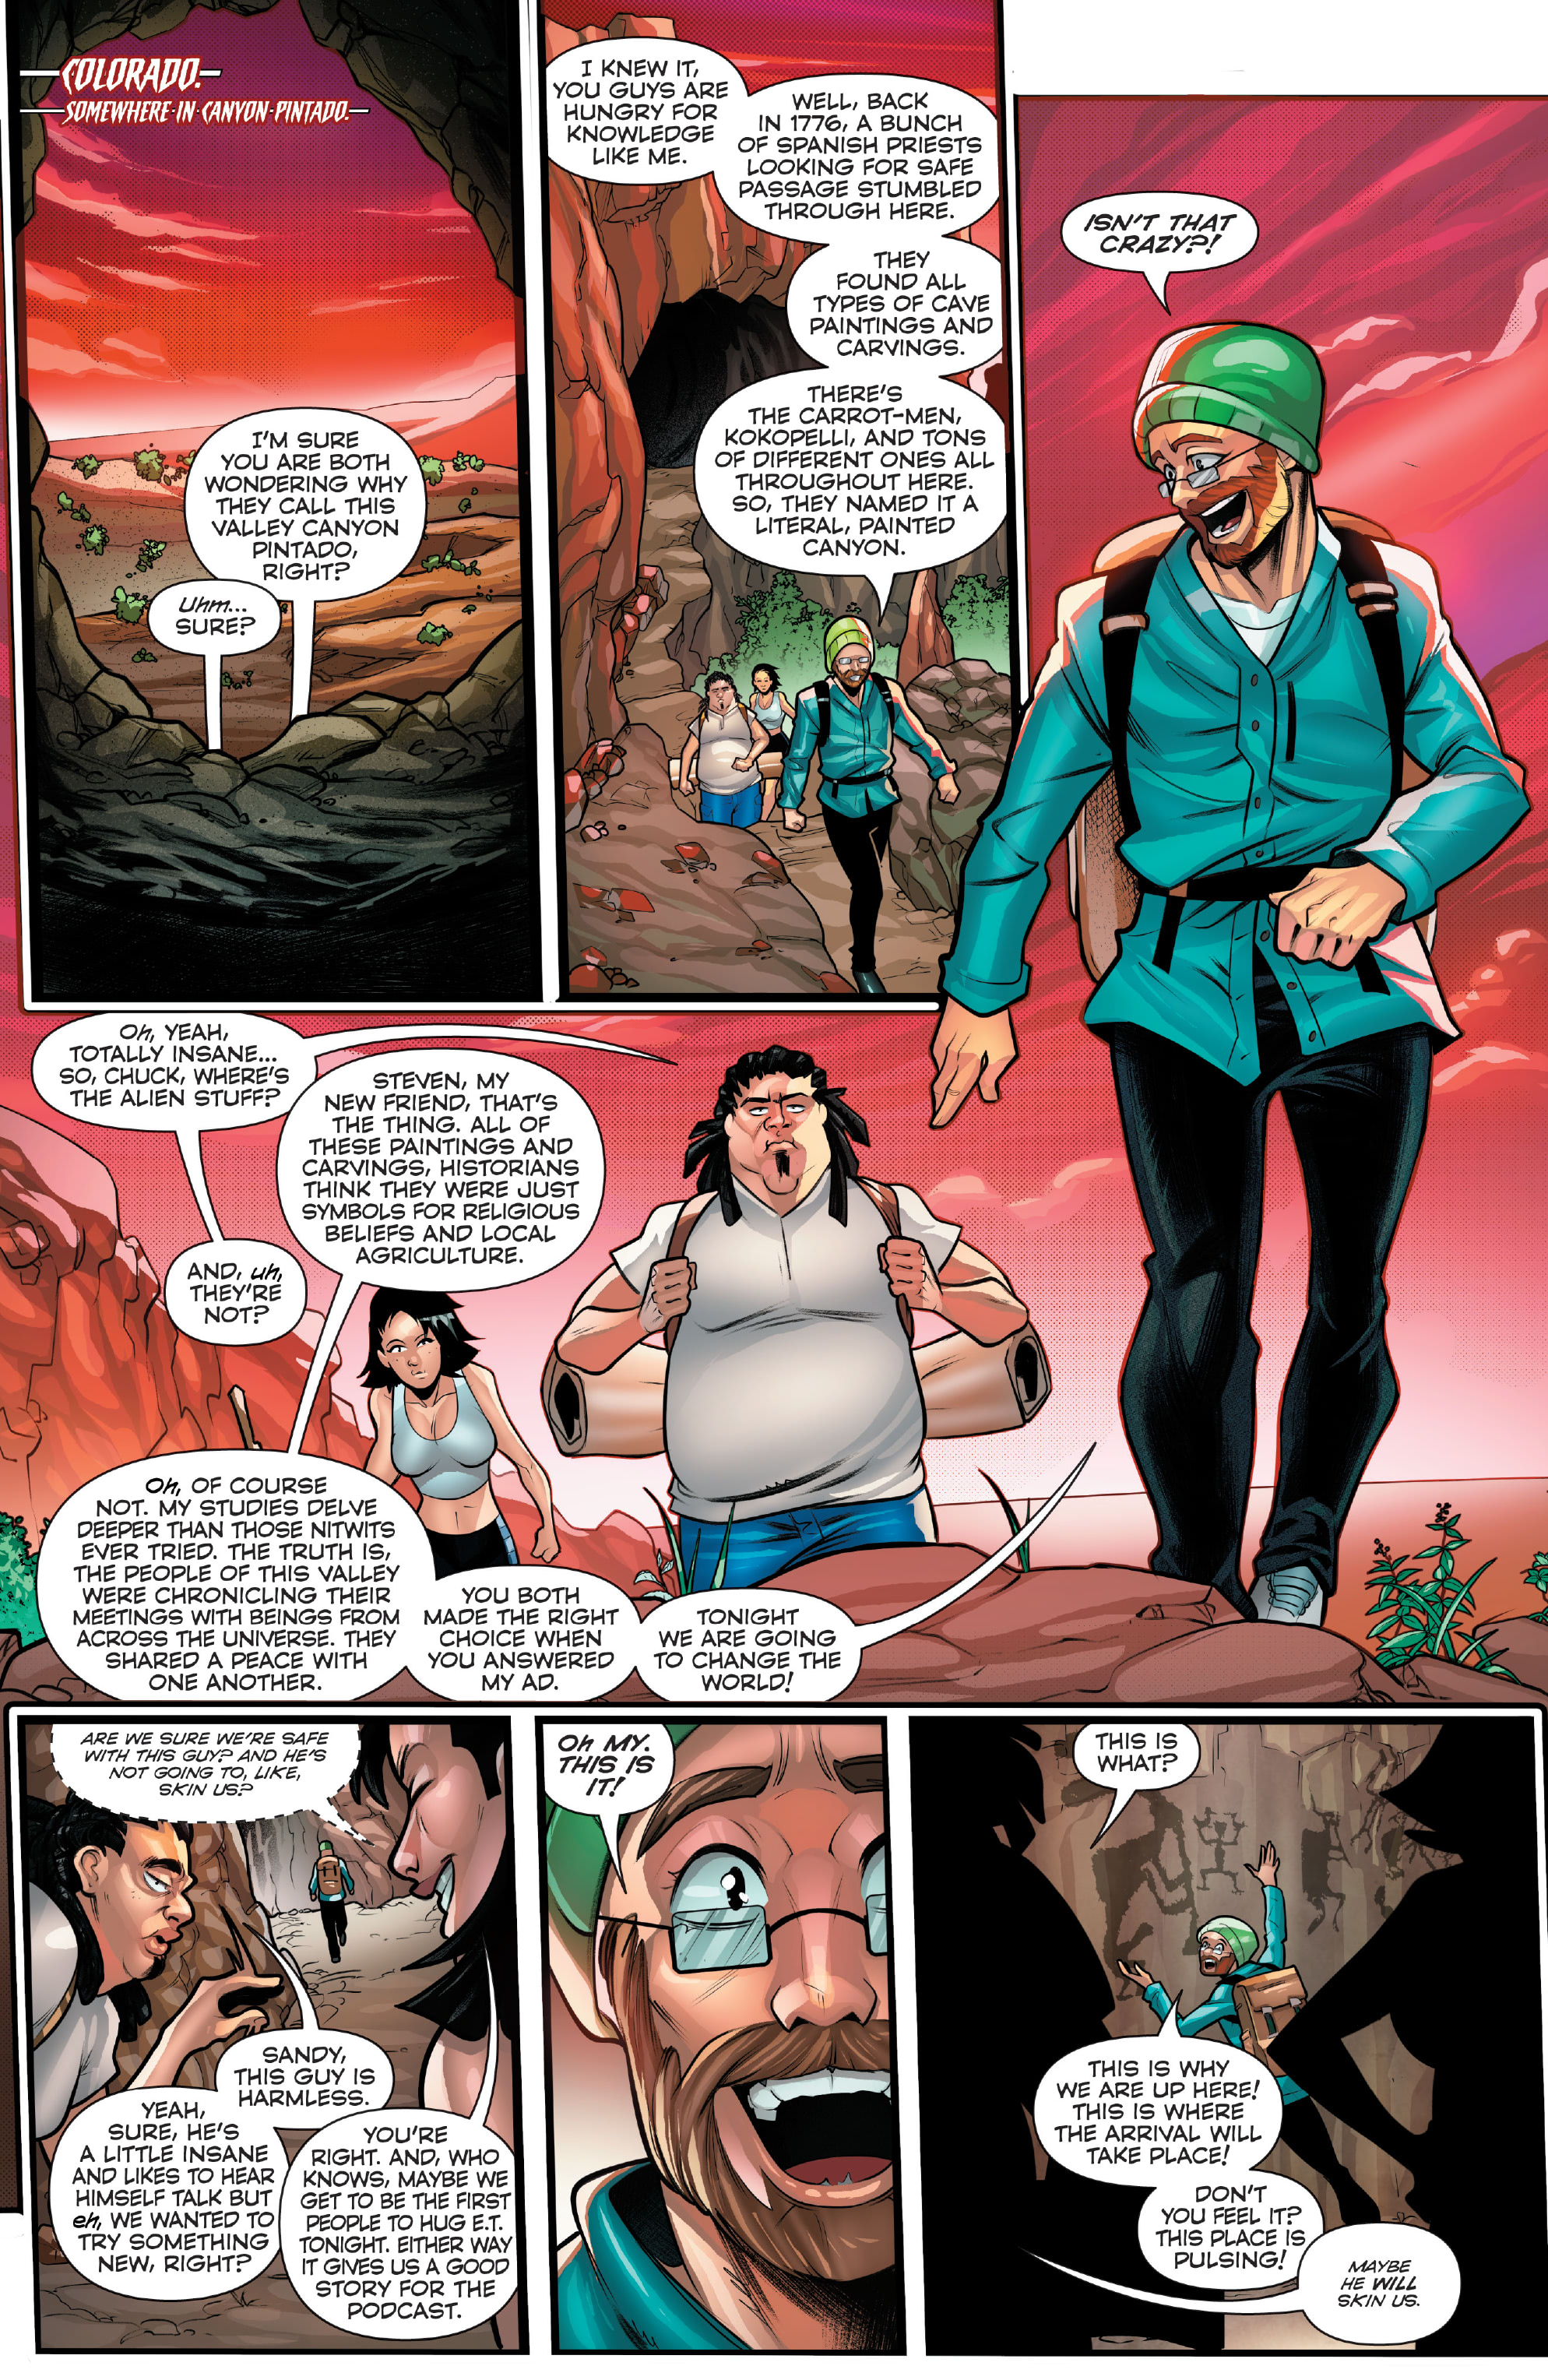 Grimm Fairy Tales - 2022 May the 4th Cosplay Special (2022): Chapter 1 - Page 3